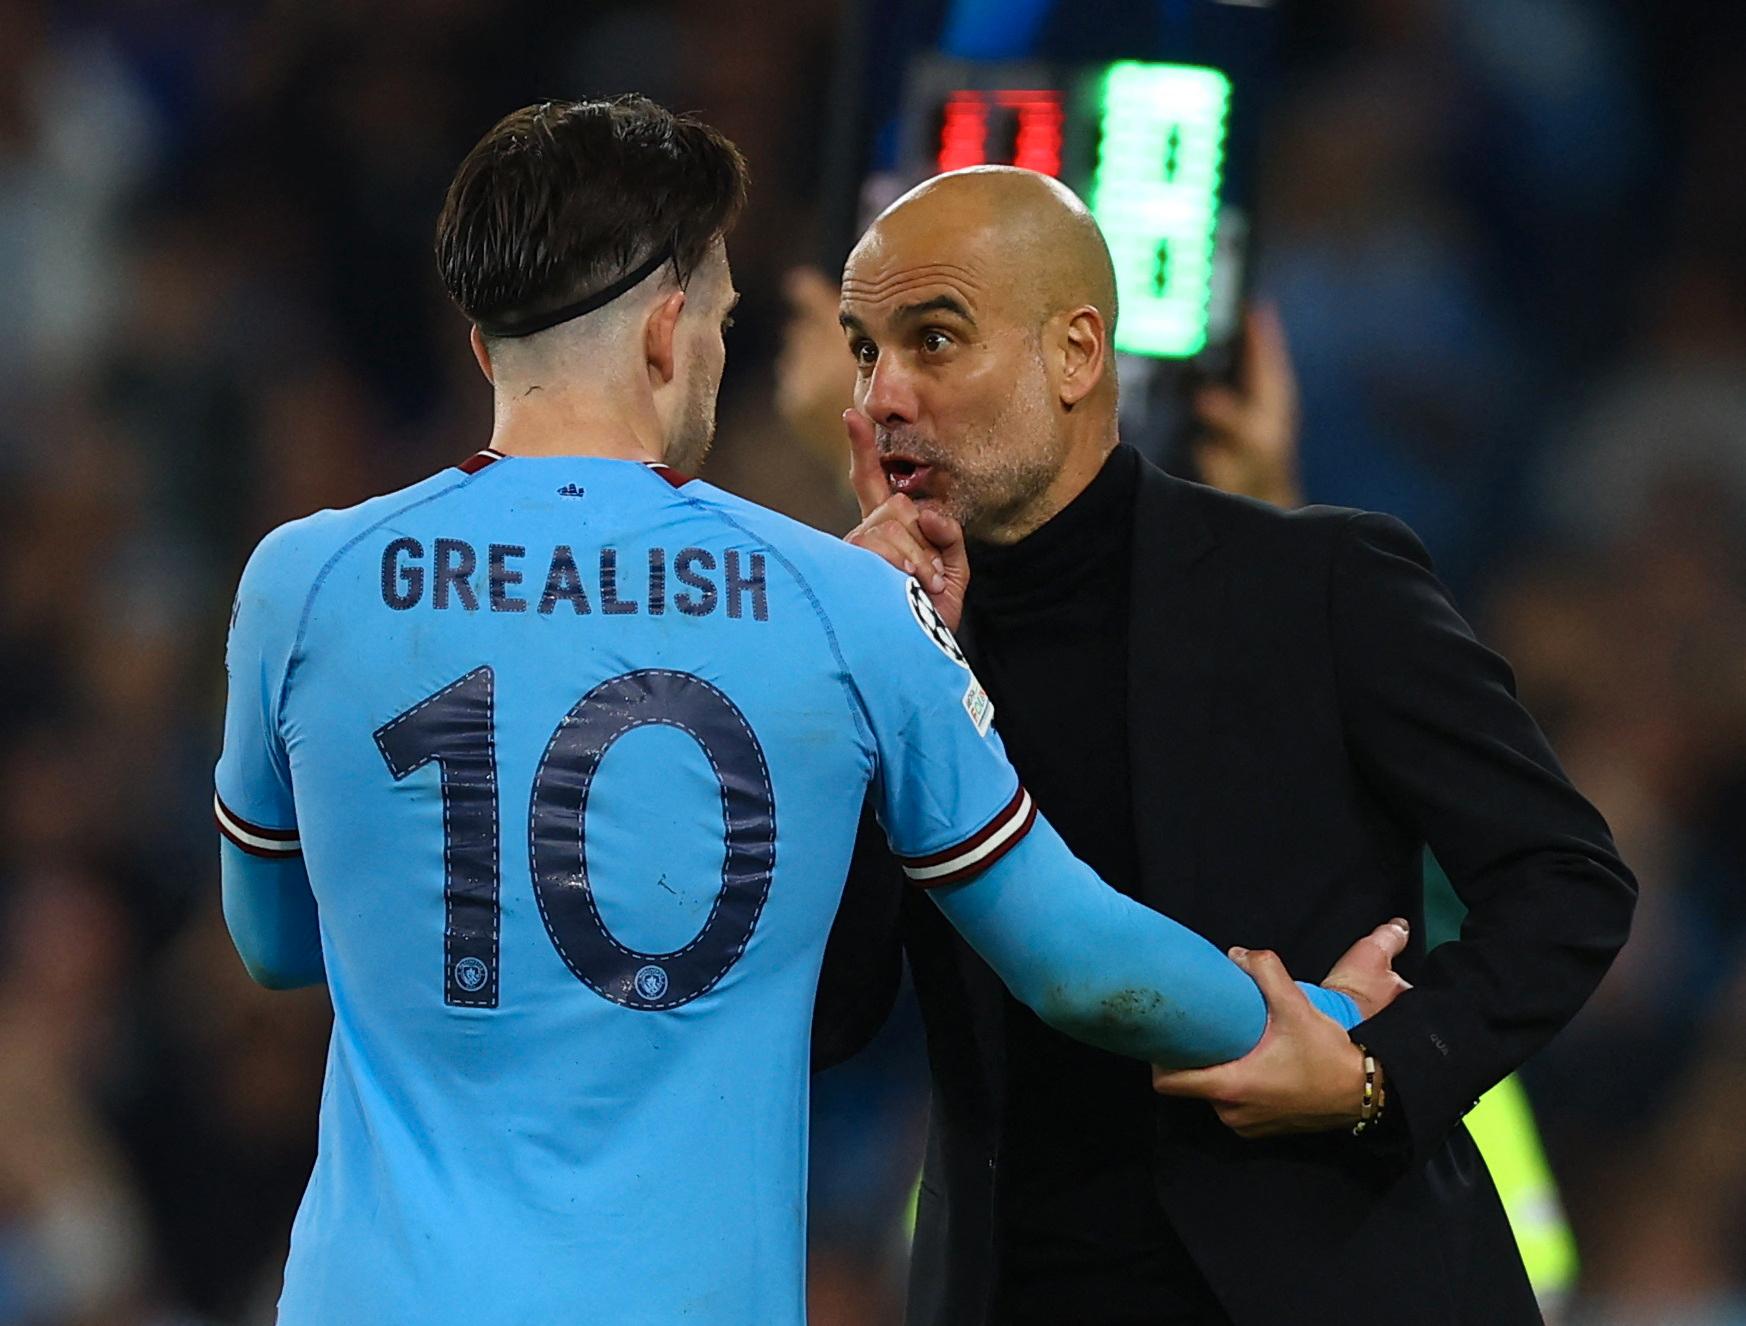 Guardiola scolds Grealish’s message: – I don’t like it